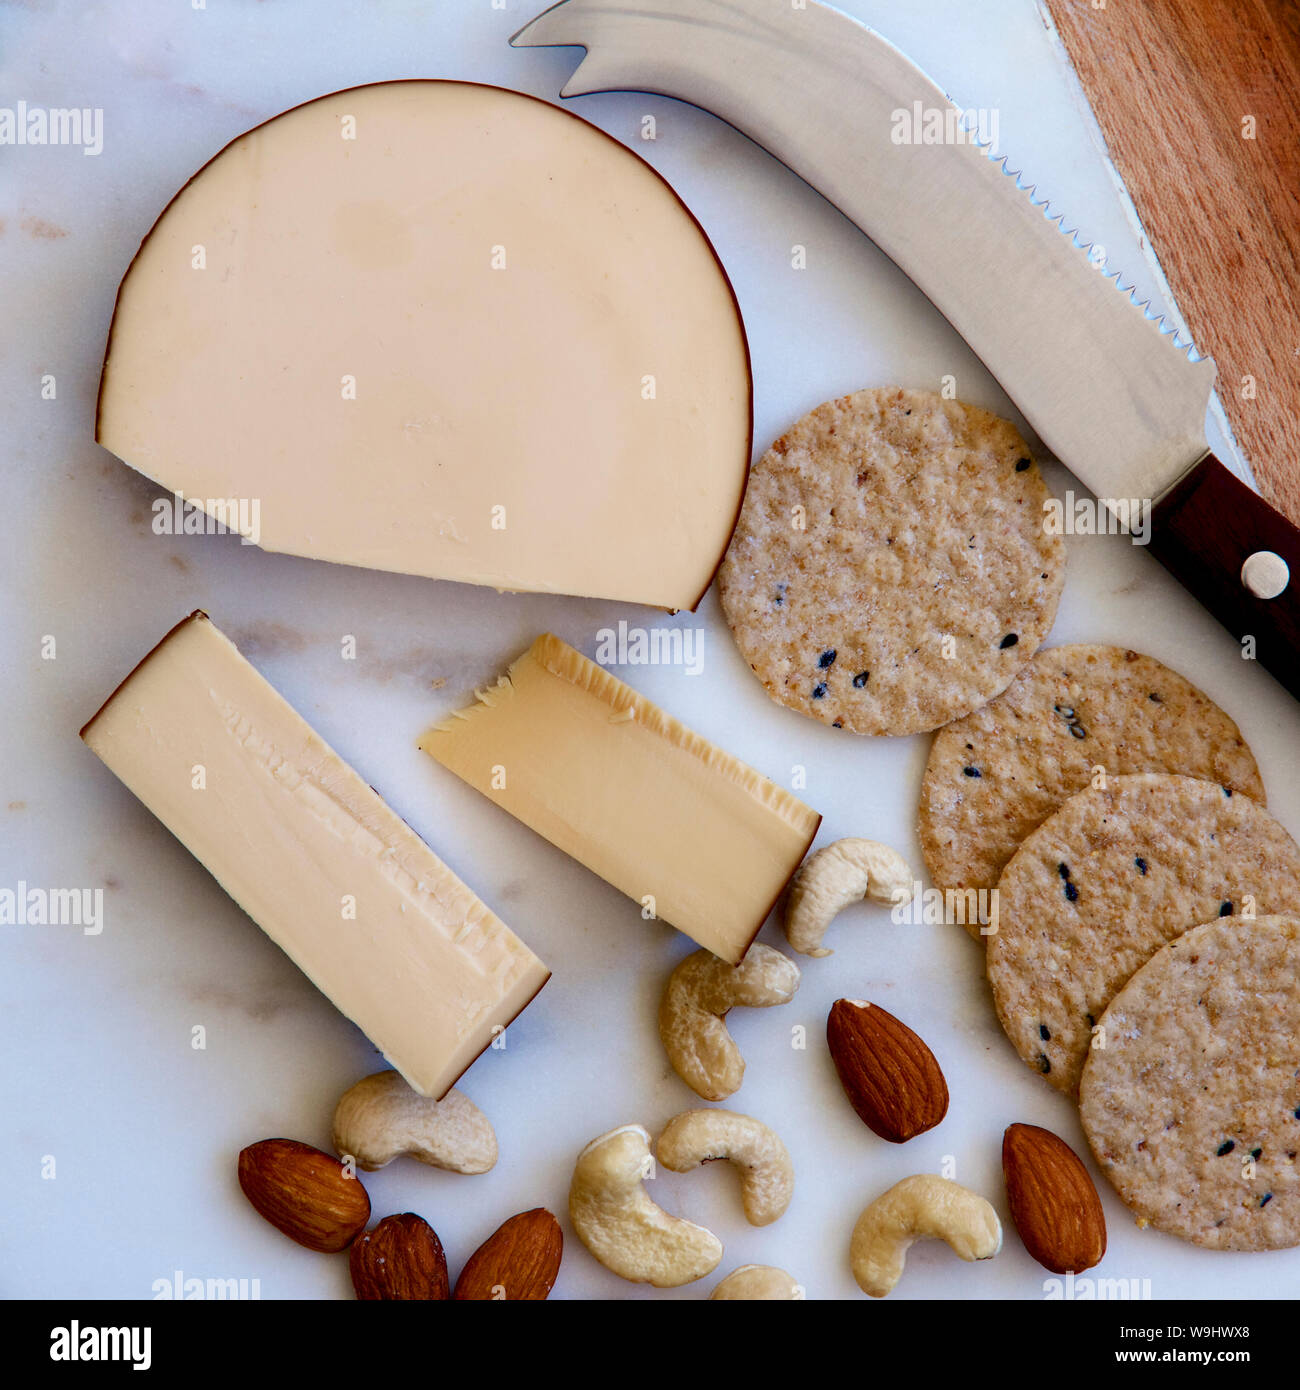 Biscuits and cheese with nuts on a board. Stock Photo